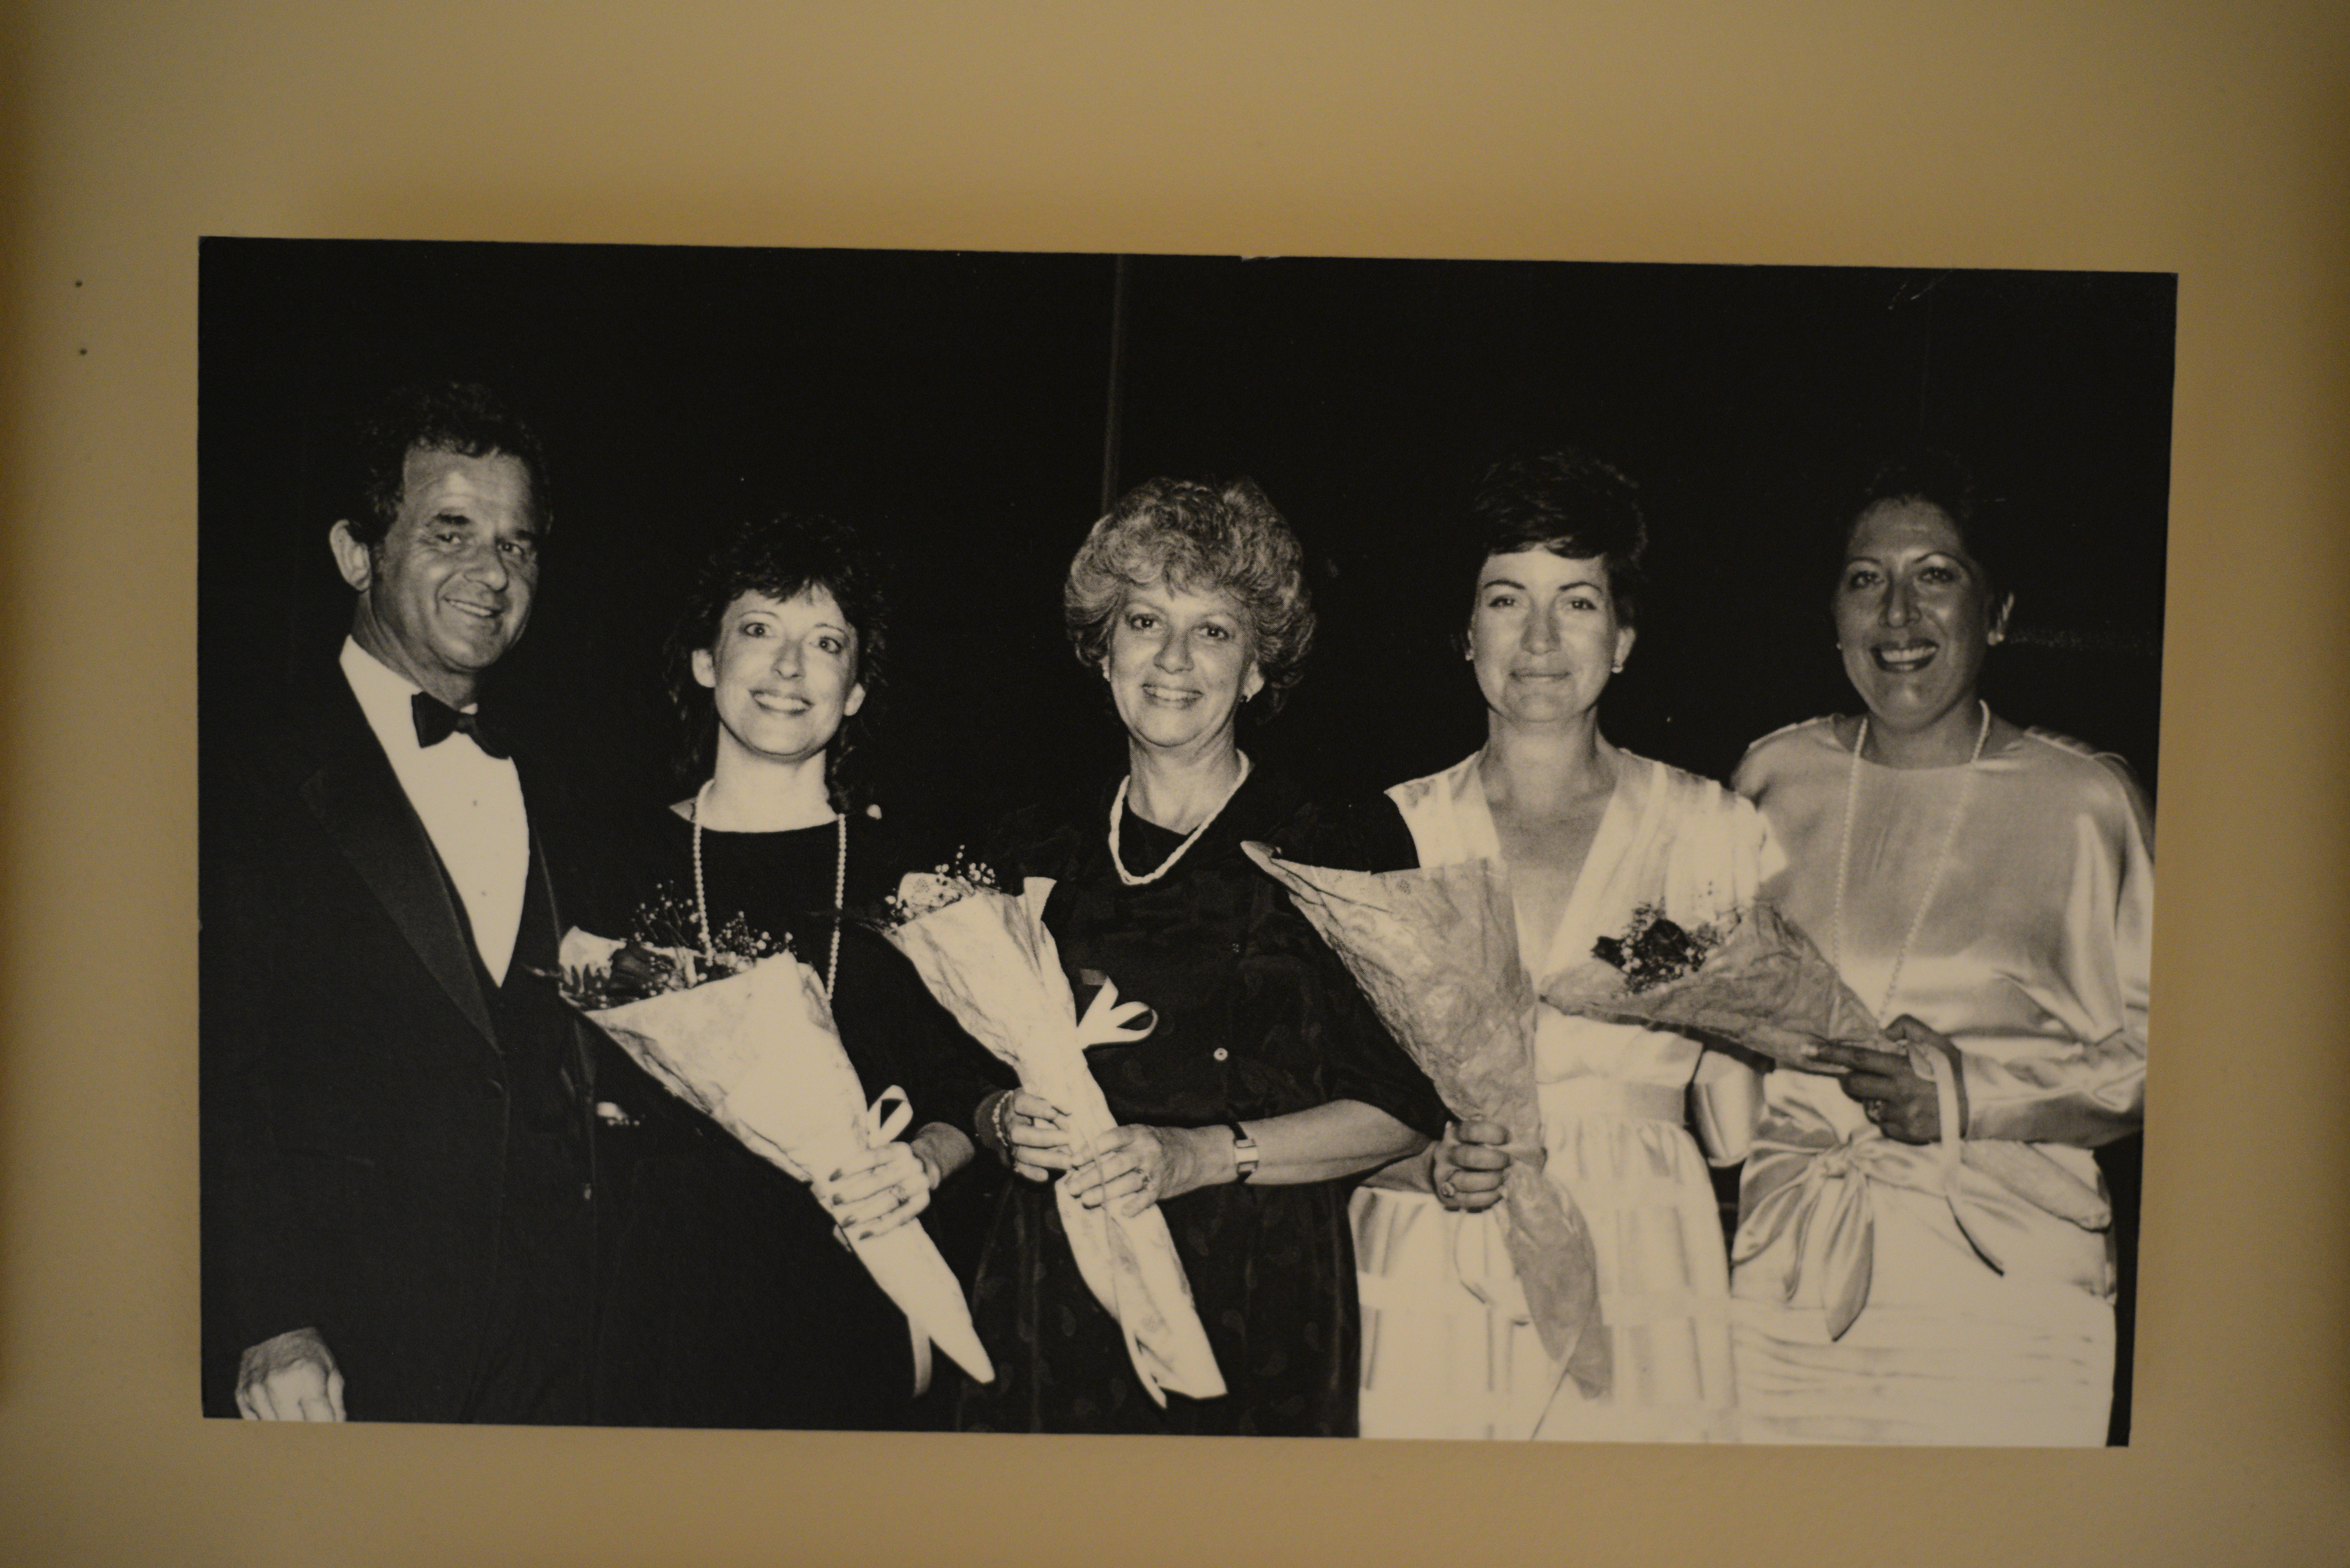 Photograph of a group of women, including Dorothy Eisenberg, holding bouquets of flowers, date unknown